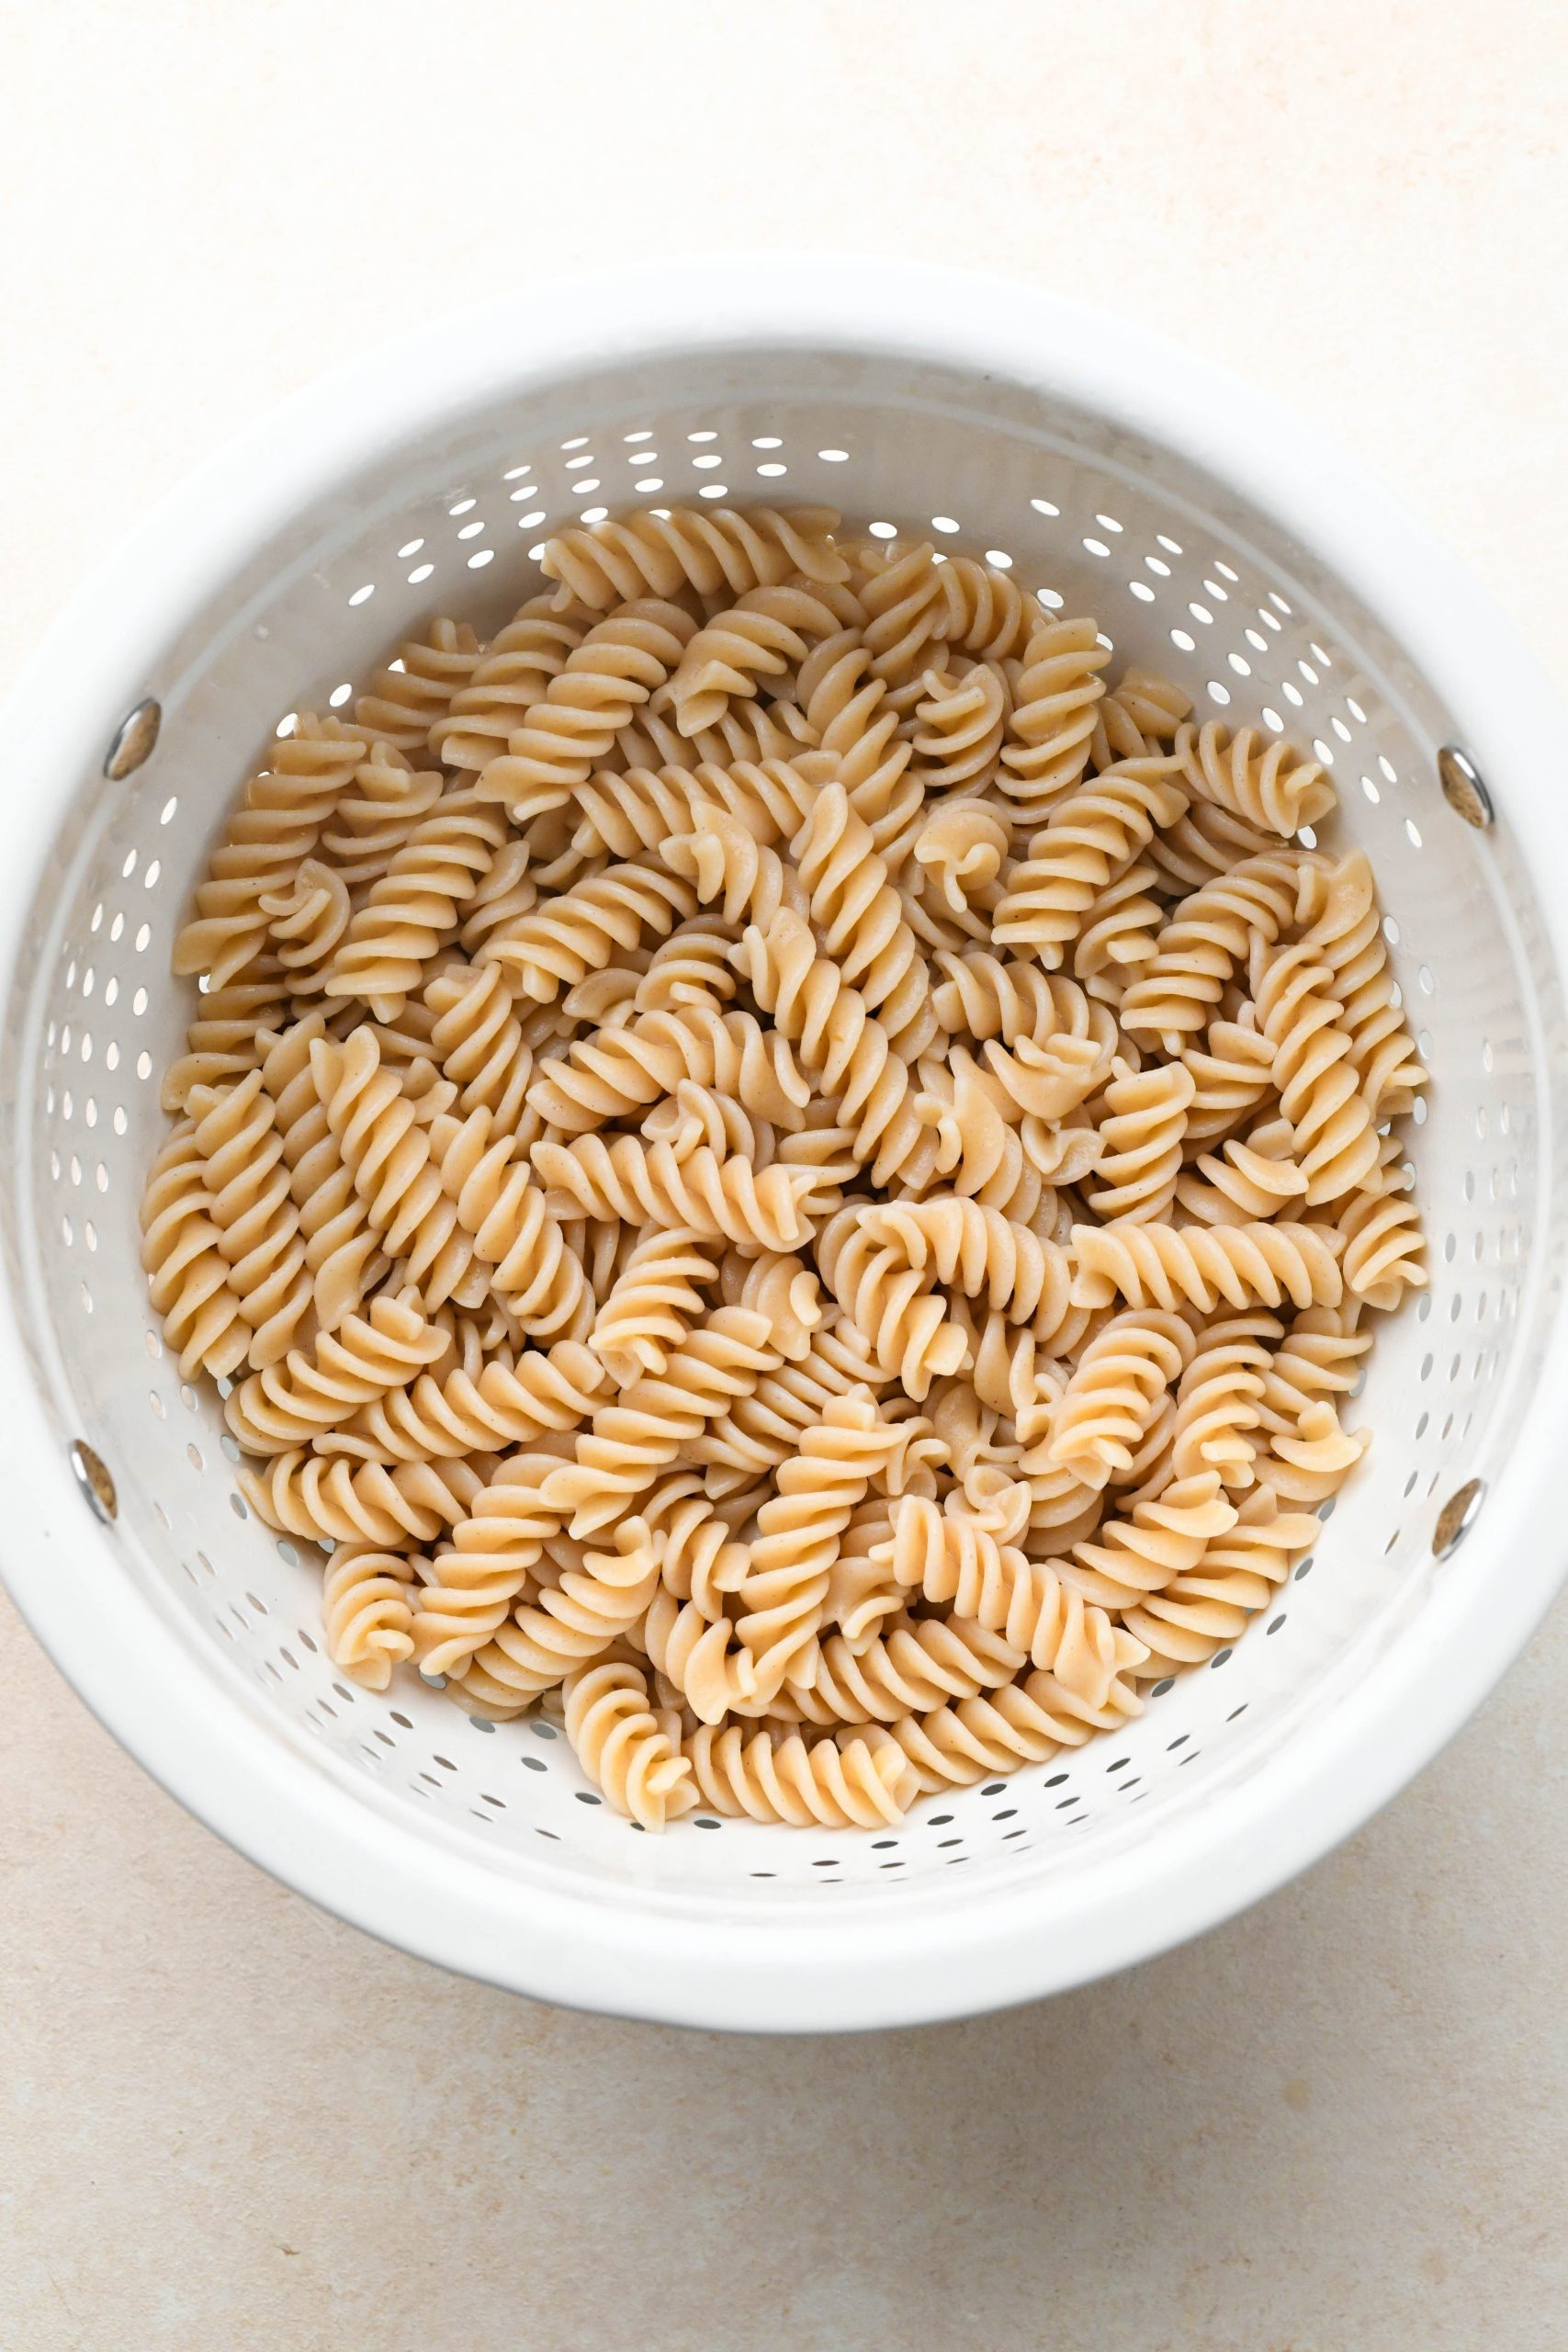 How to make Easy Gluten Free Italian Pasta Salad: GF fusilli pasta cooked and drained in a colander.